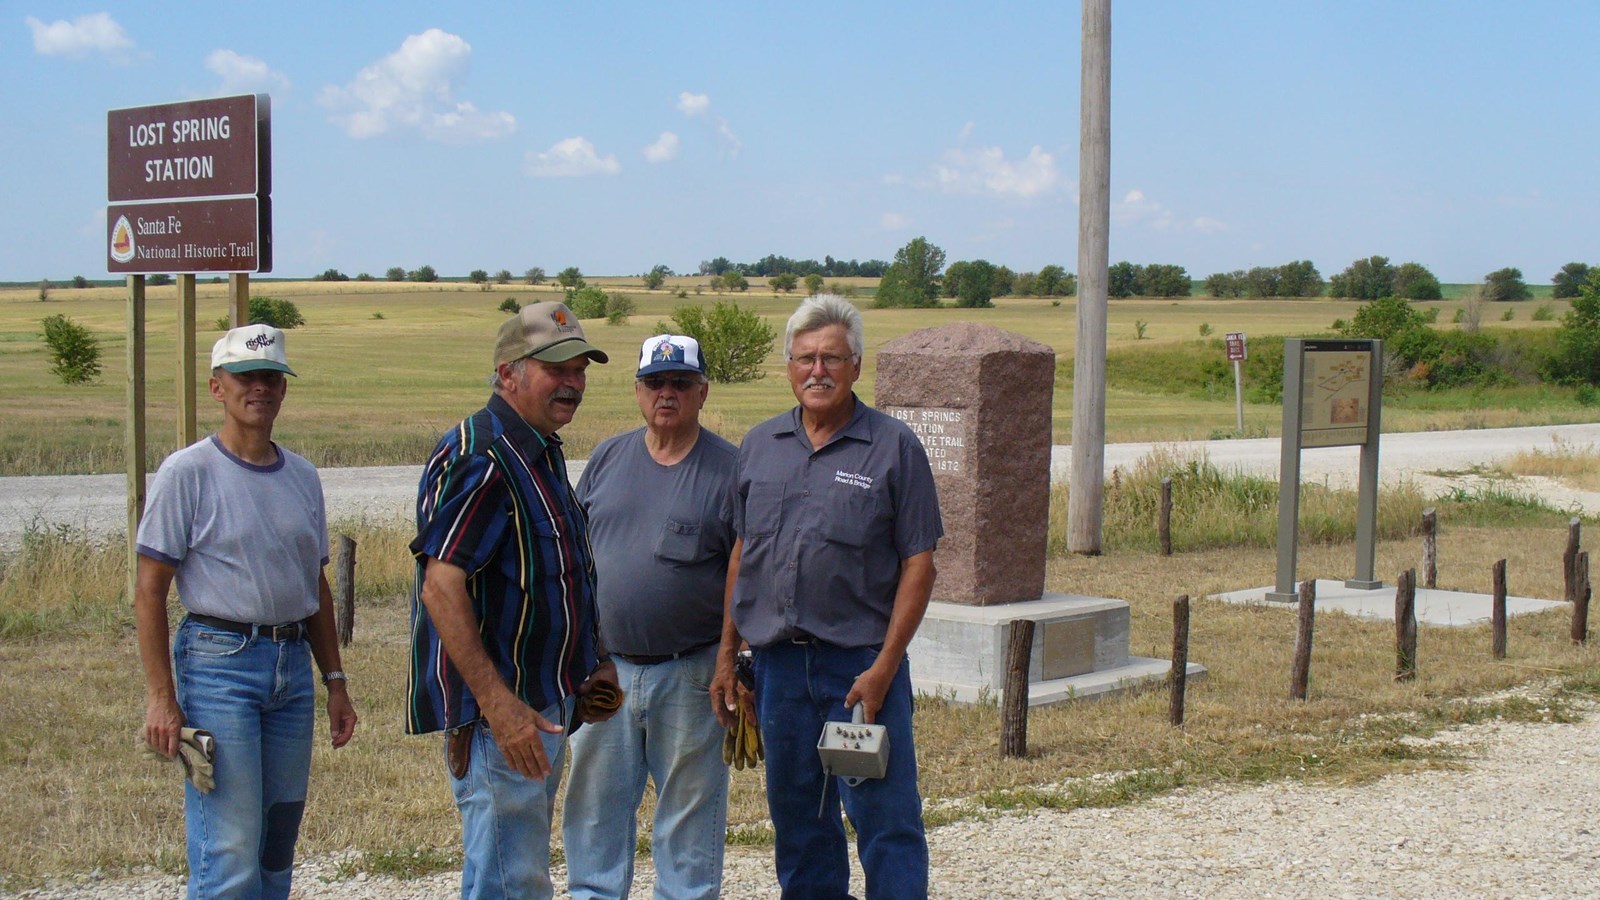 A group of men stand next to a site identification sign and a stone marker in a grassy prairie.